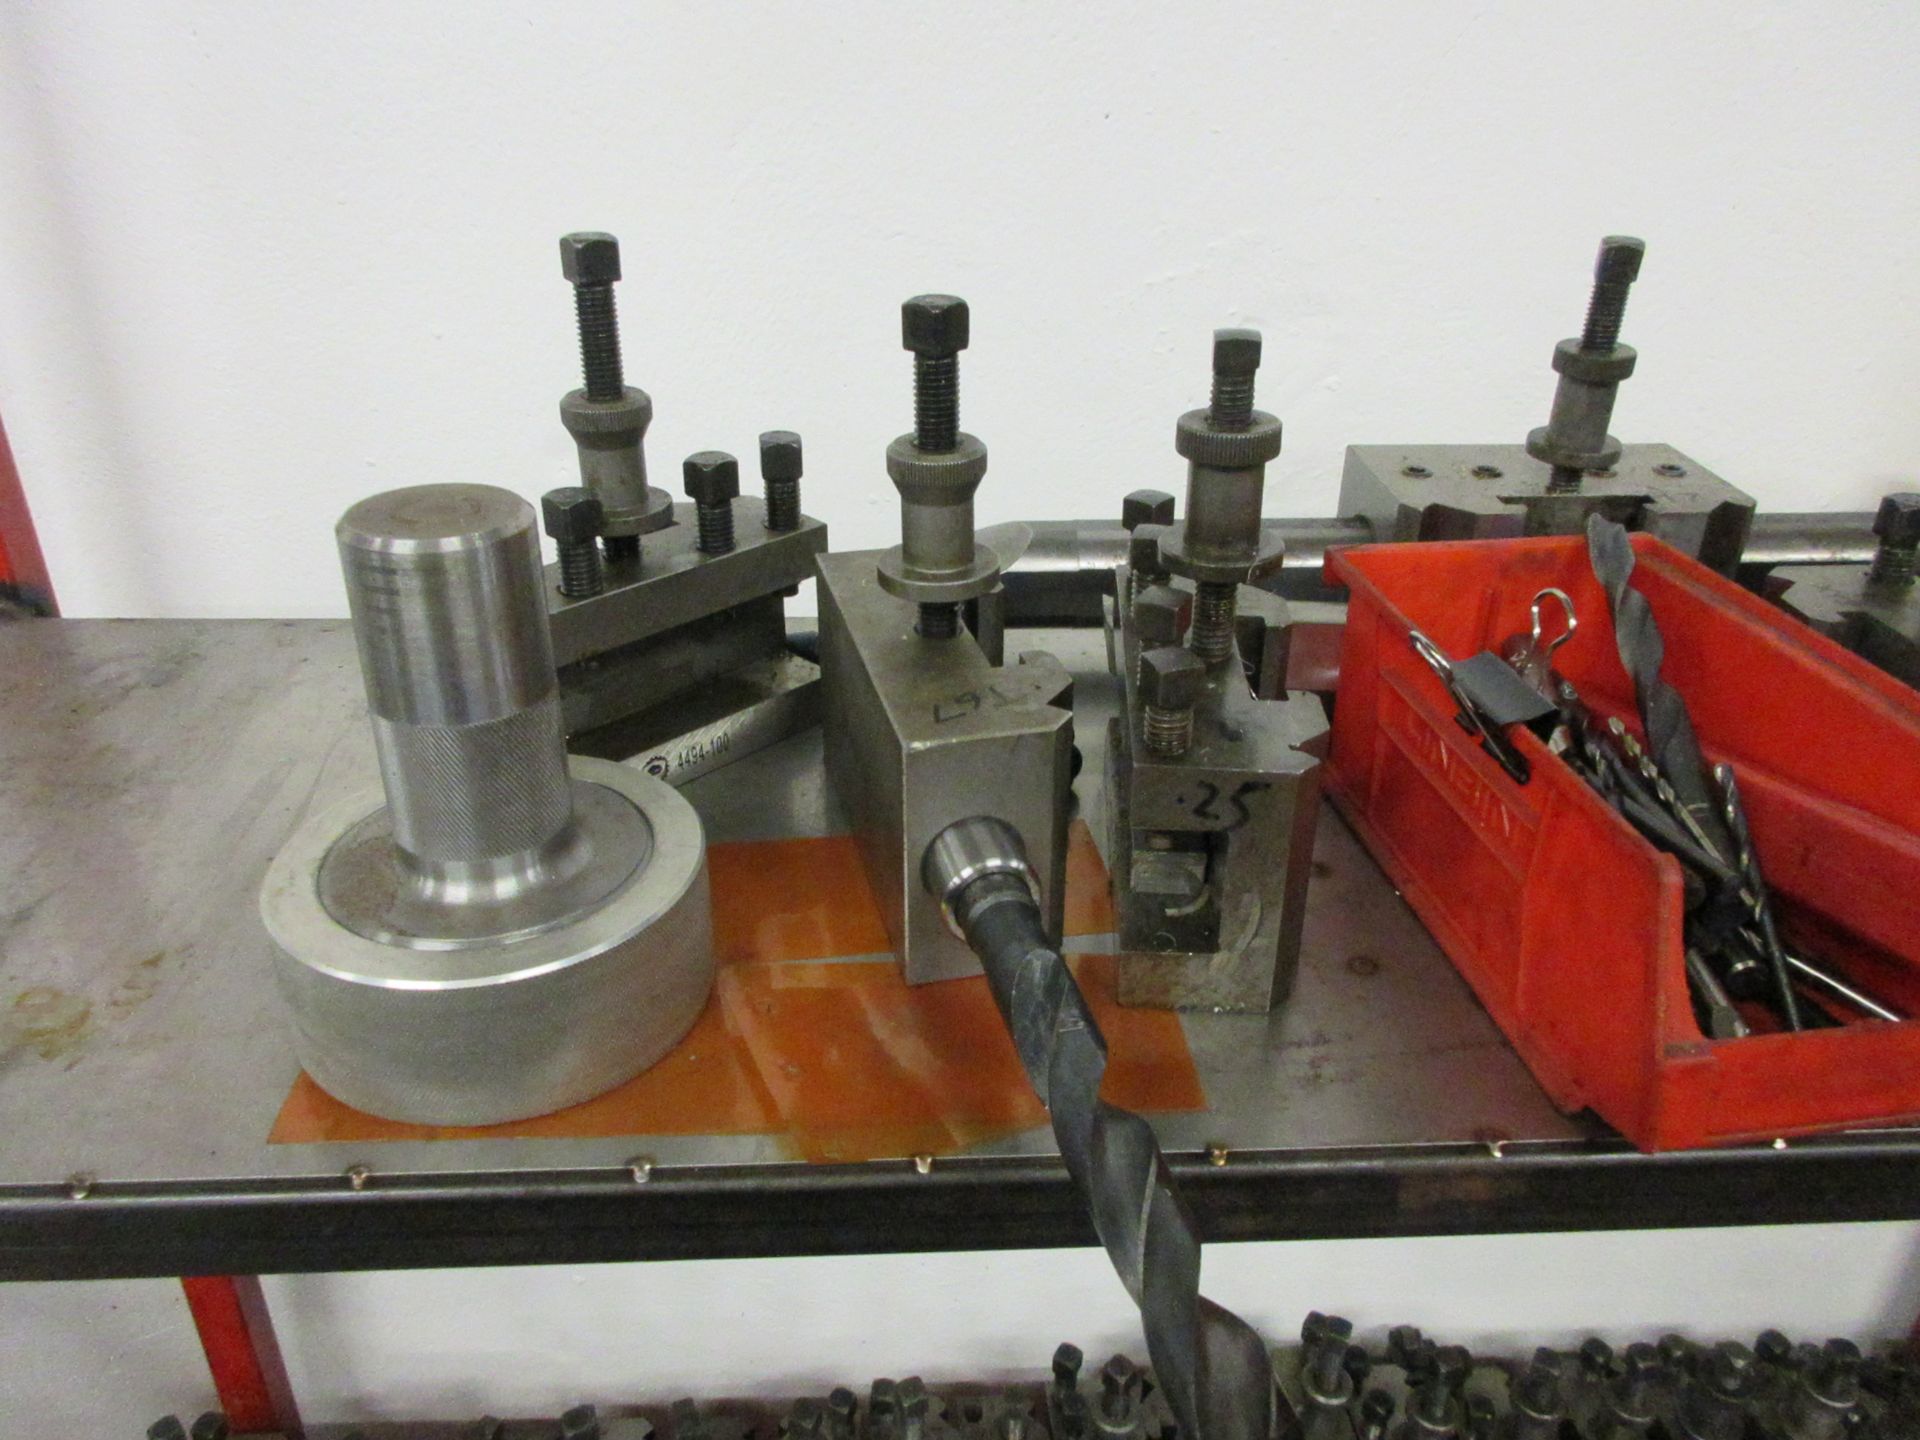 Quantity of various tool posts with associated attachments, including drill bits, cutting tools, - Image 5 of 6